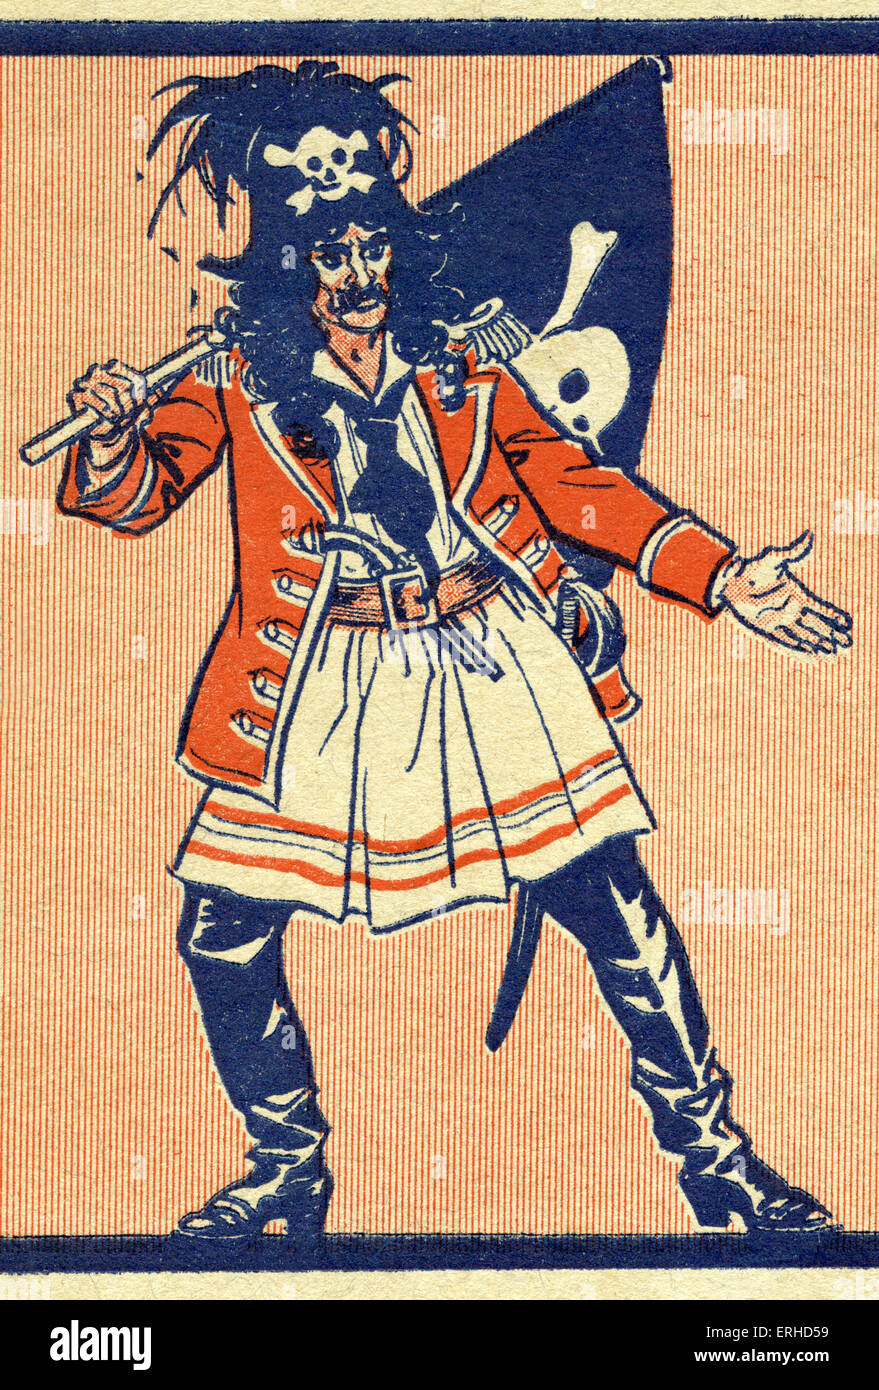 Pirate with skull and crossbones on his hat and waving the Jolly Roger flag, also with skull and crossbones.  (illustration for Stock Photo